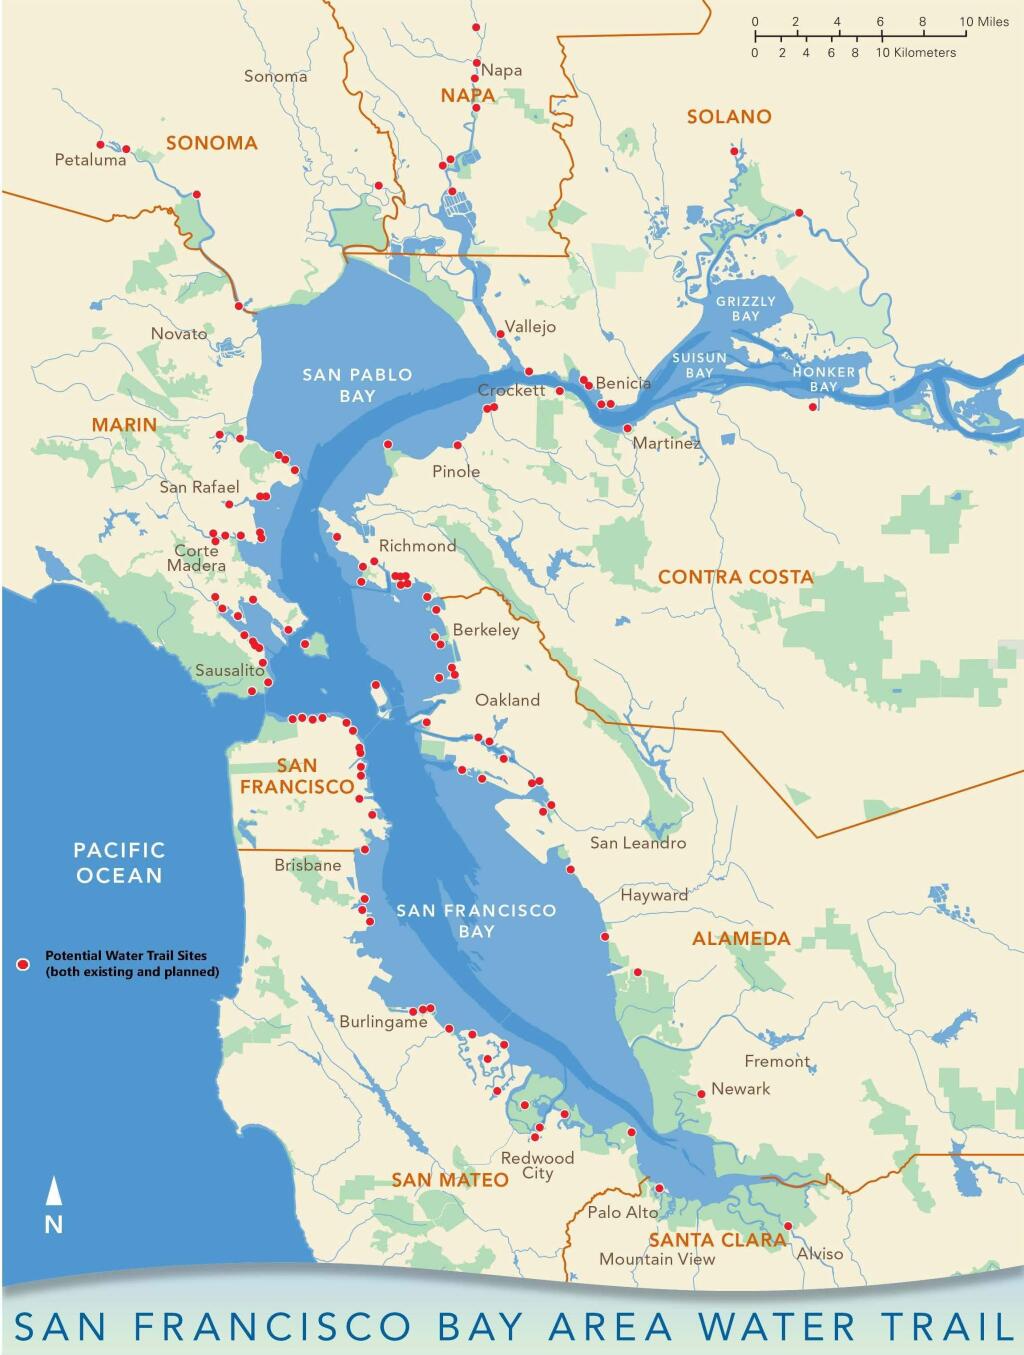 This map shows trailheads for the San Francisco Bay Area Water Trail.